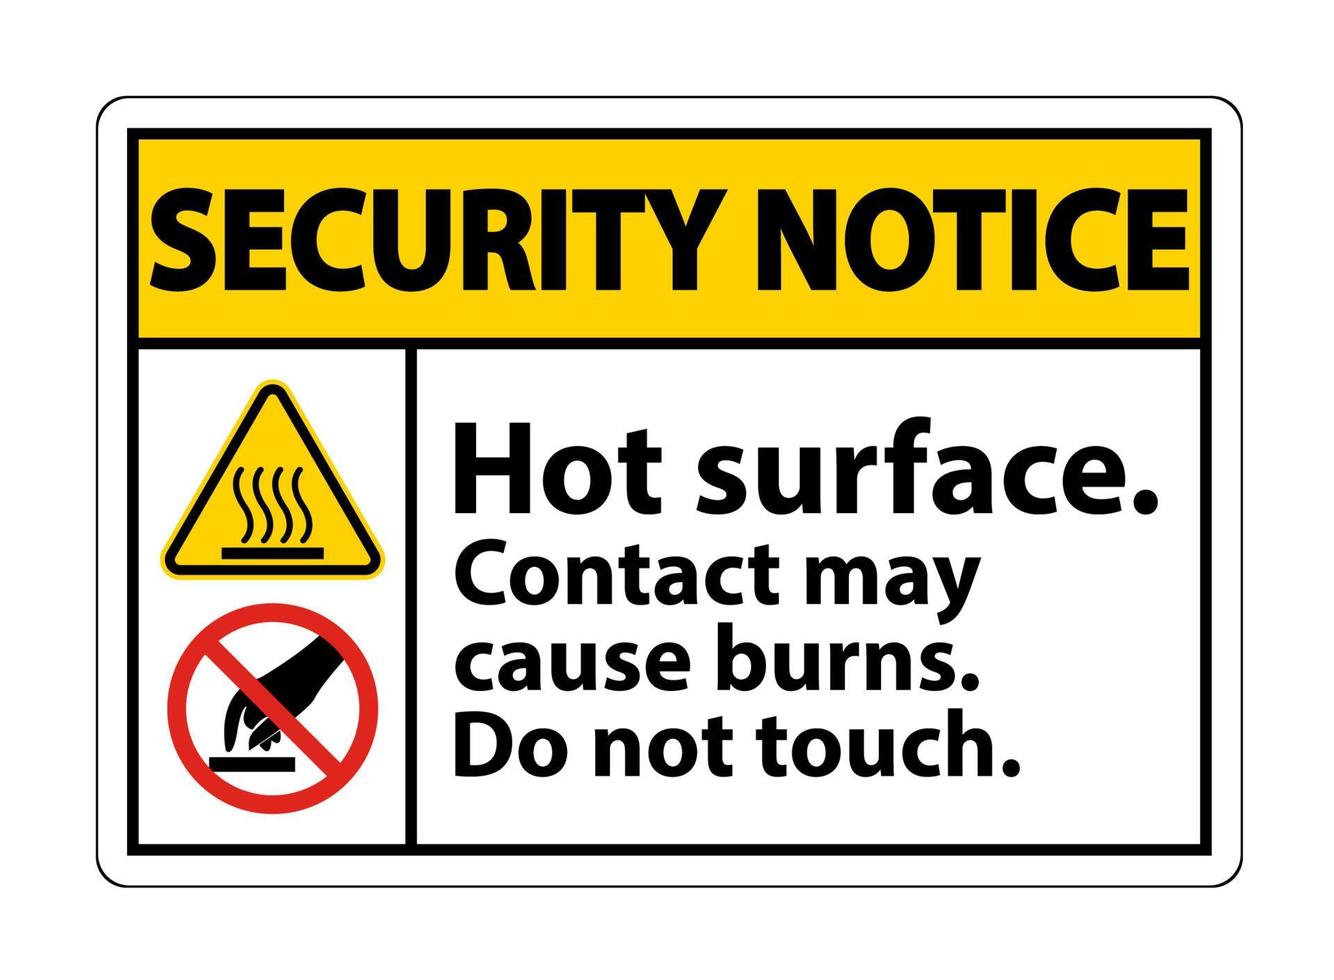 Seurity Notice Hot Surface Do Not Touch Symbol Sign Isolate on White Background,Vector Illustration vector